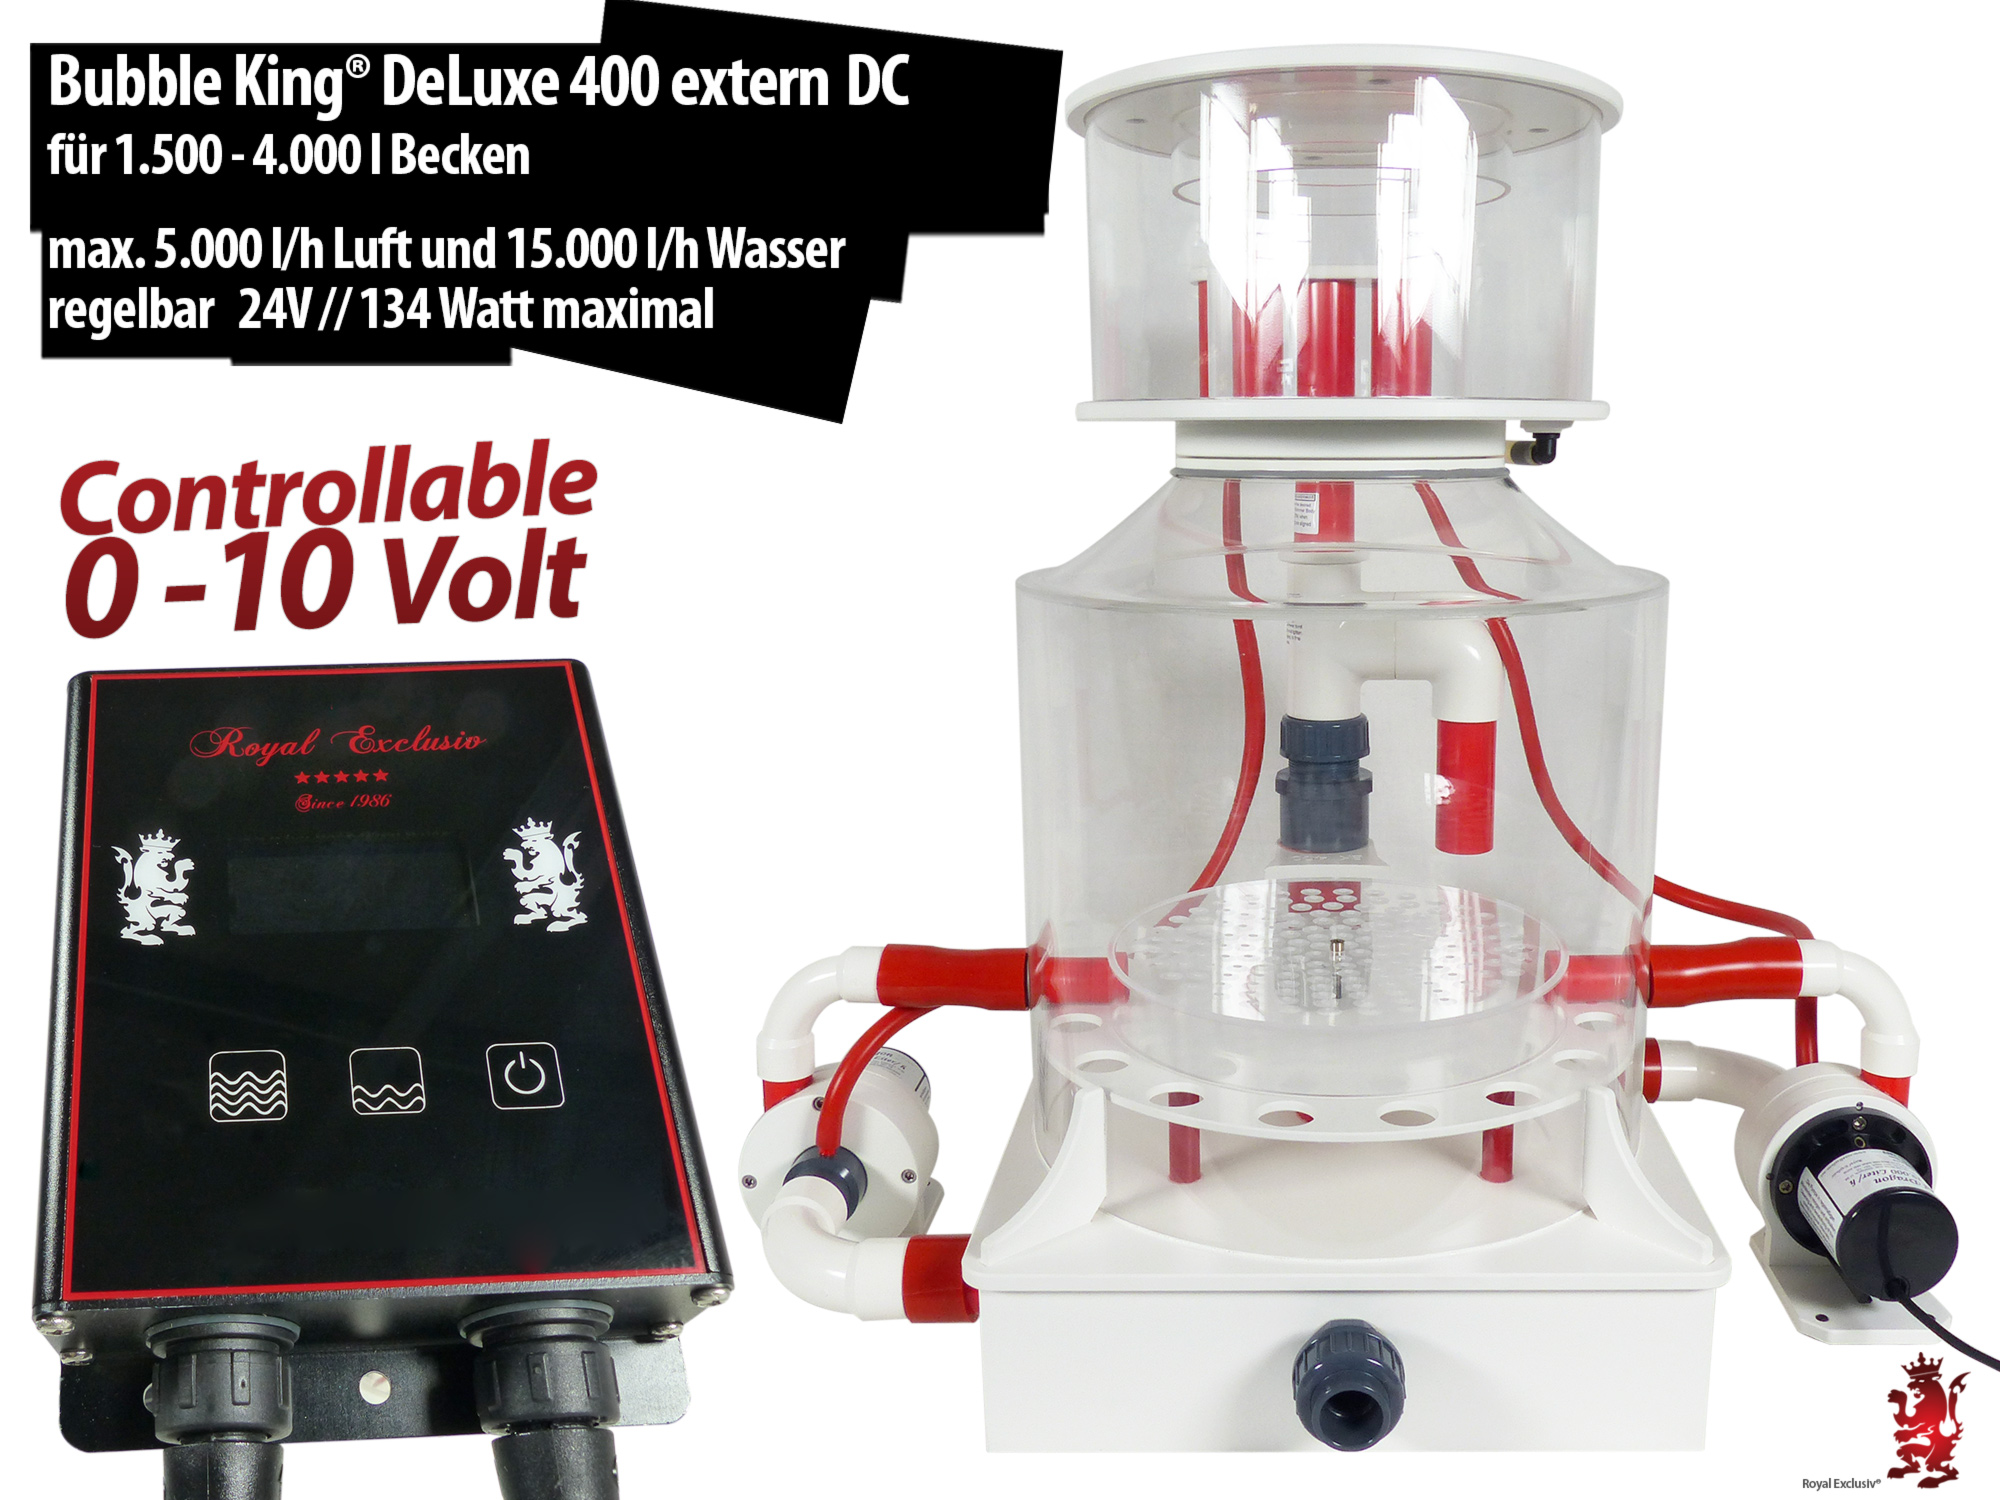 Royal Exclusiv Bubble King DeLuxe 400 extern 24V